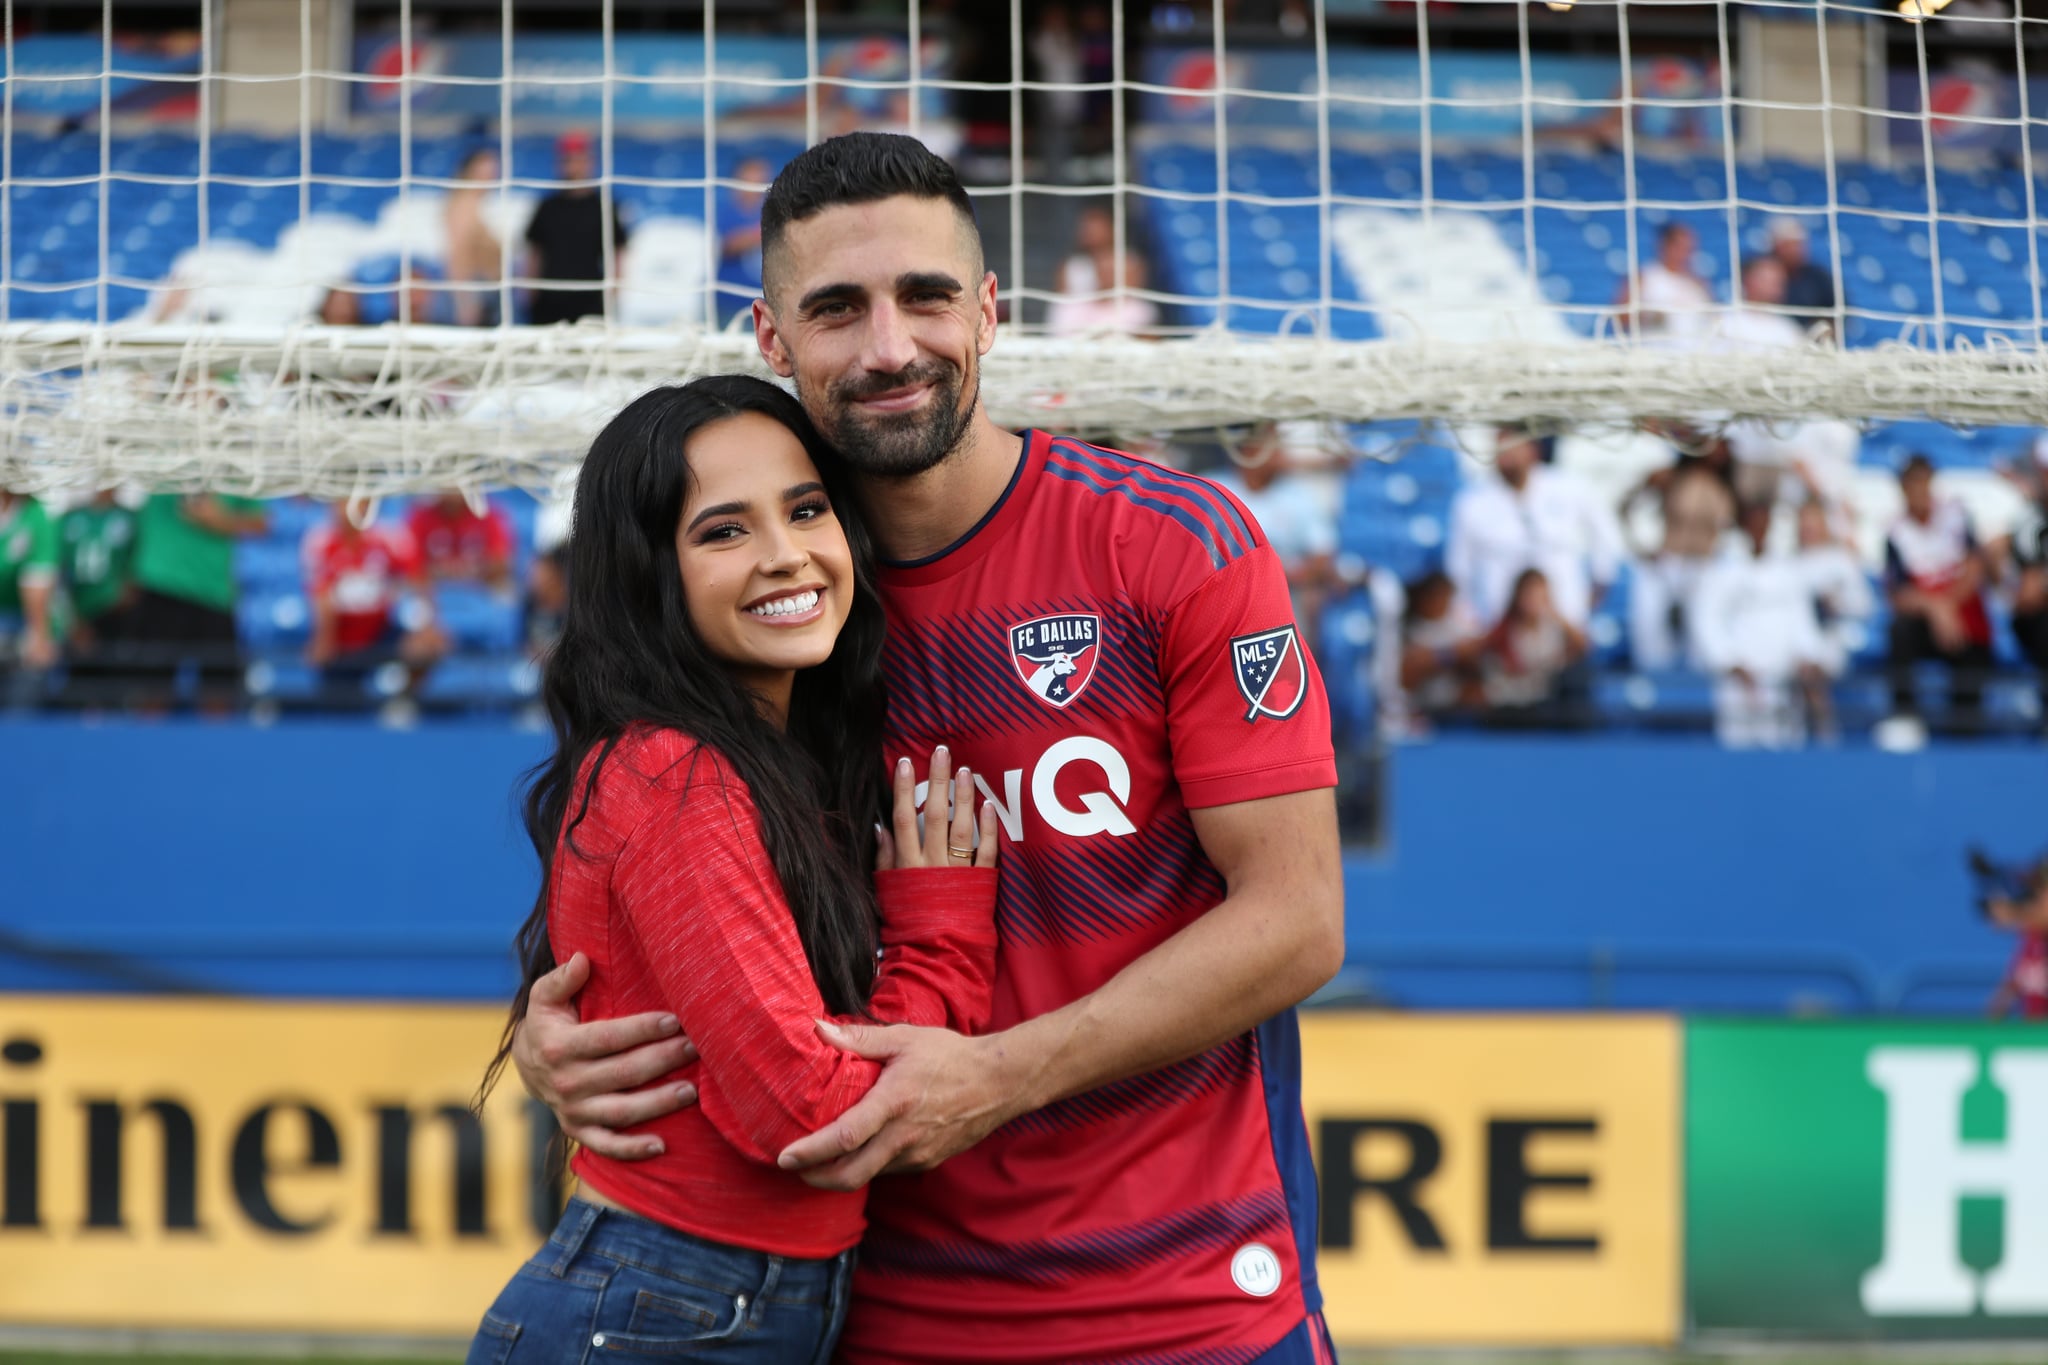 FRISCO, TX - OCTOBER 09: Singer Becky G and boyfriend Sebastian Lletget #12 of FC Dallas pose for a photo after the game between FC Dallas and Sporting Kansas City at Toyota Stadium on October 9, 2022 in Frisco, Texas.  (Photo by Omar Vega/Getty Images)